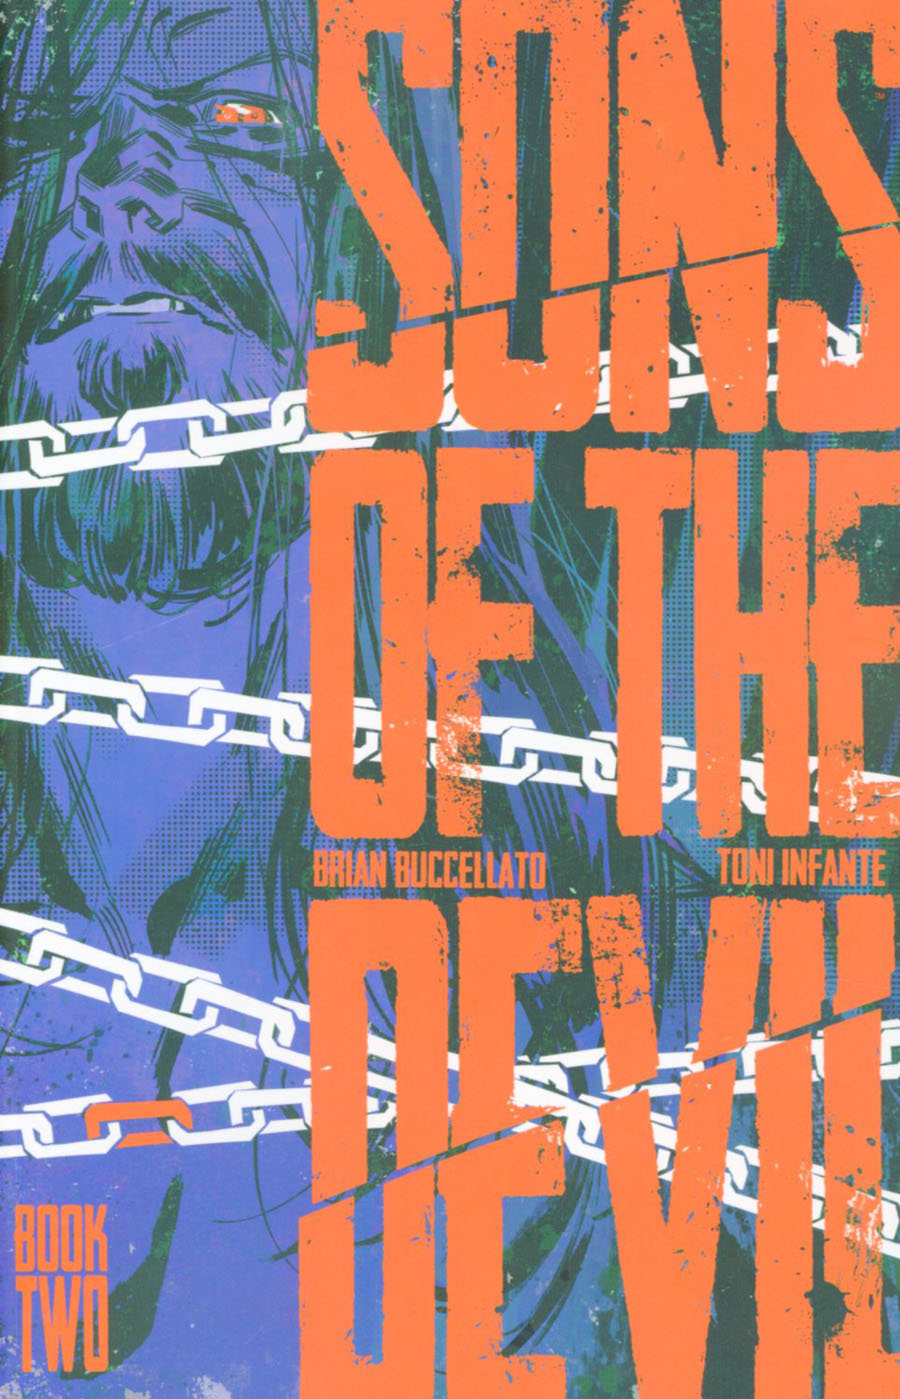 Sons Of The Devil Vol 2 TP